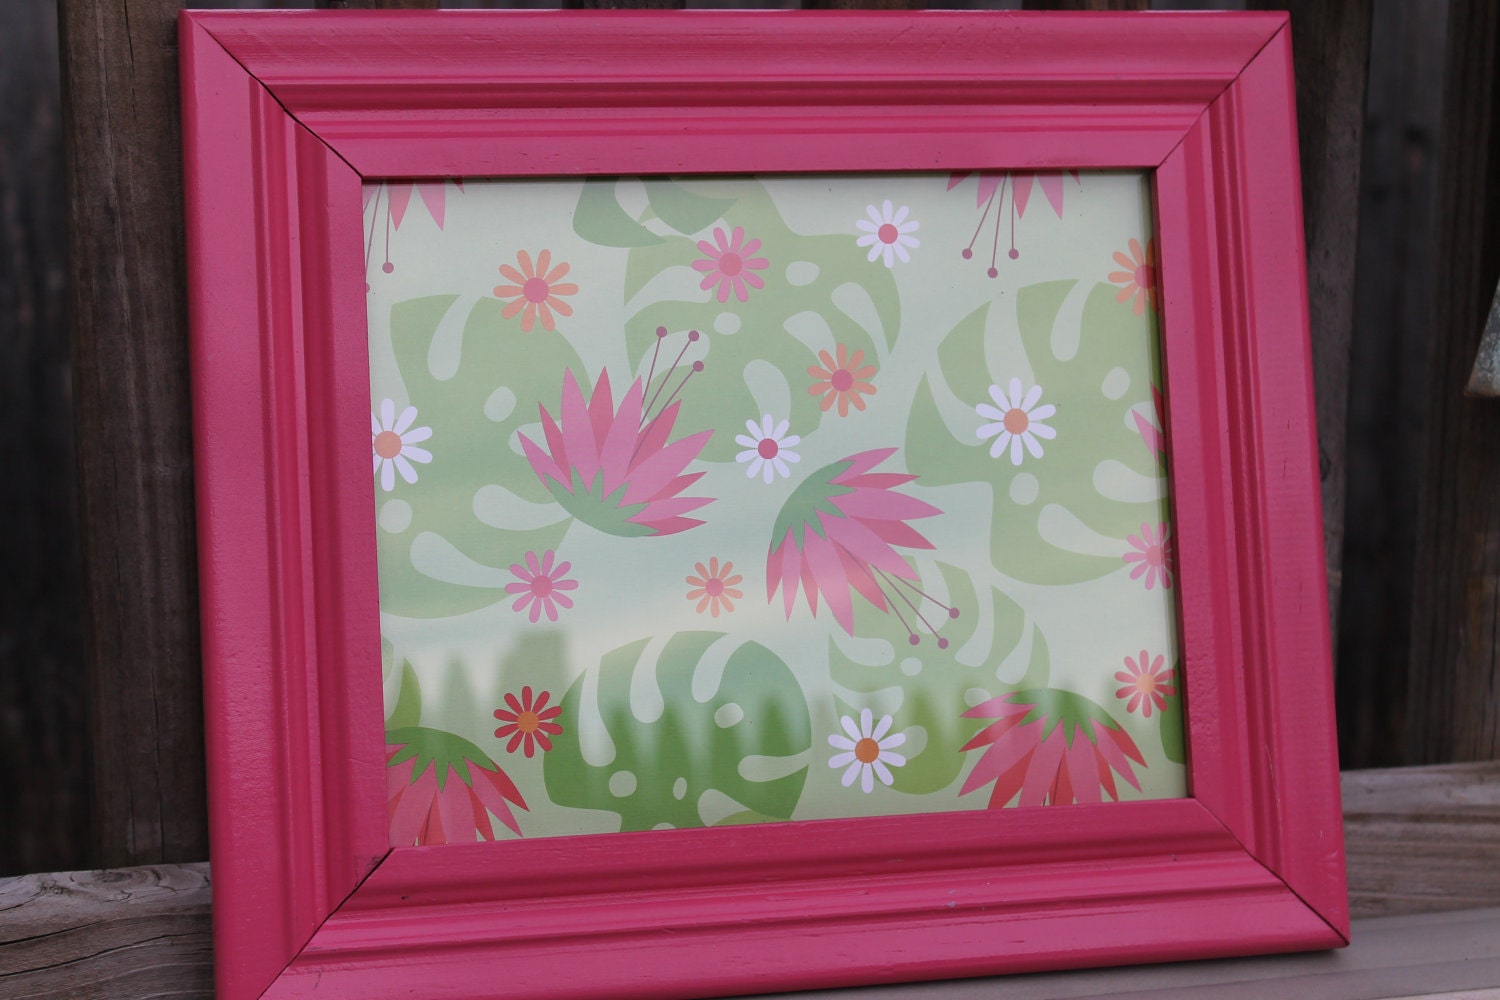 Hot Pink Picture Frame With Art-Upcycled valentines day shabby chic, modern, retro